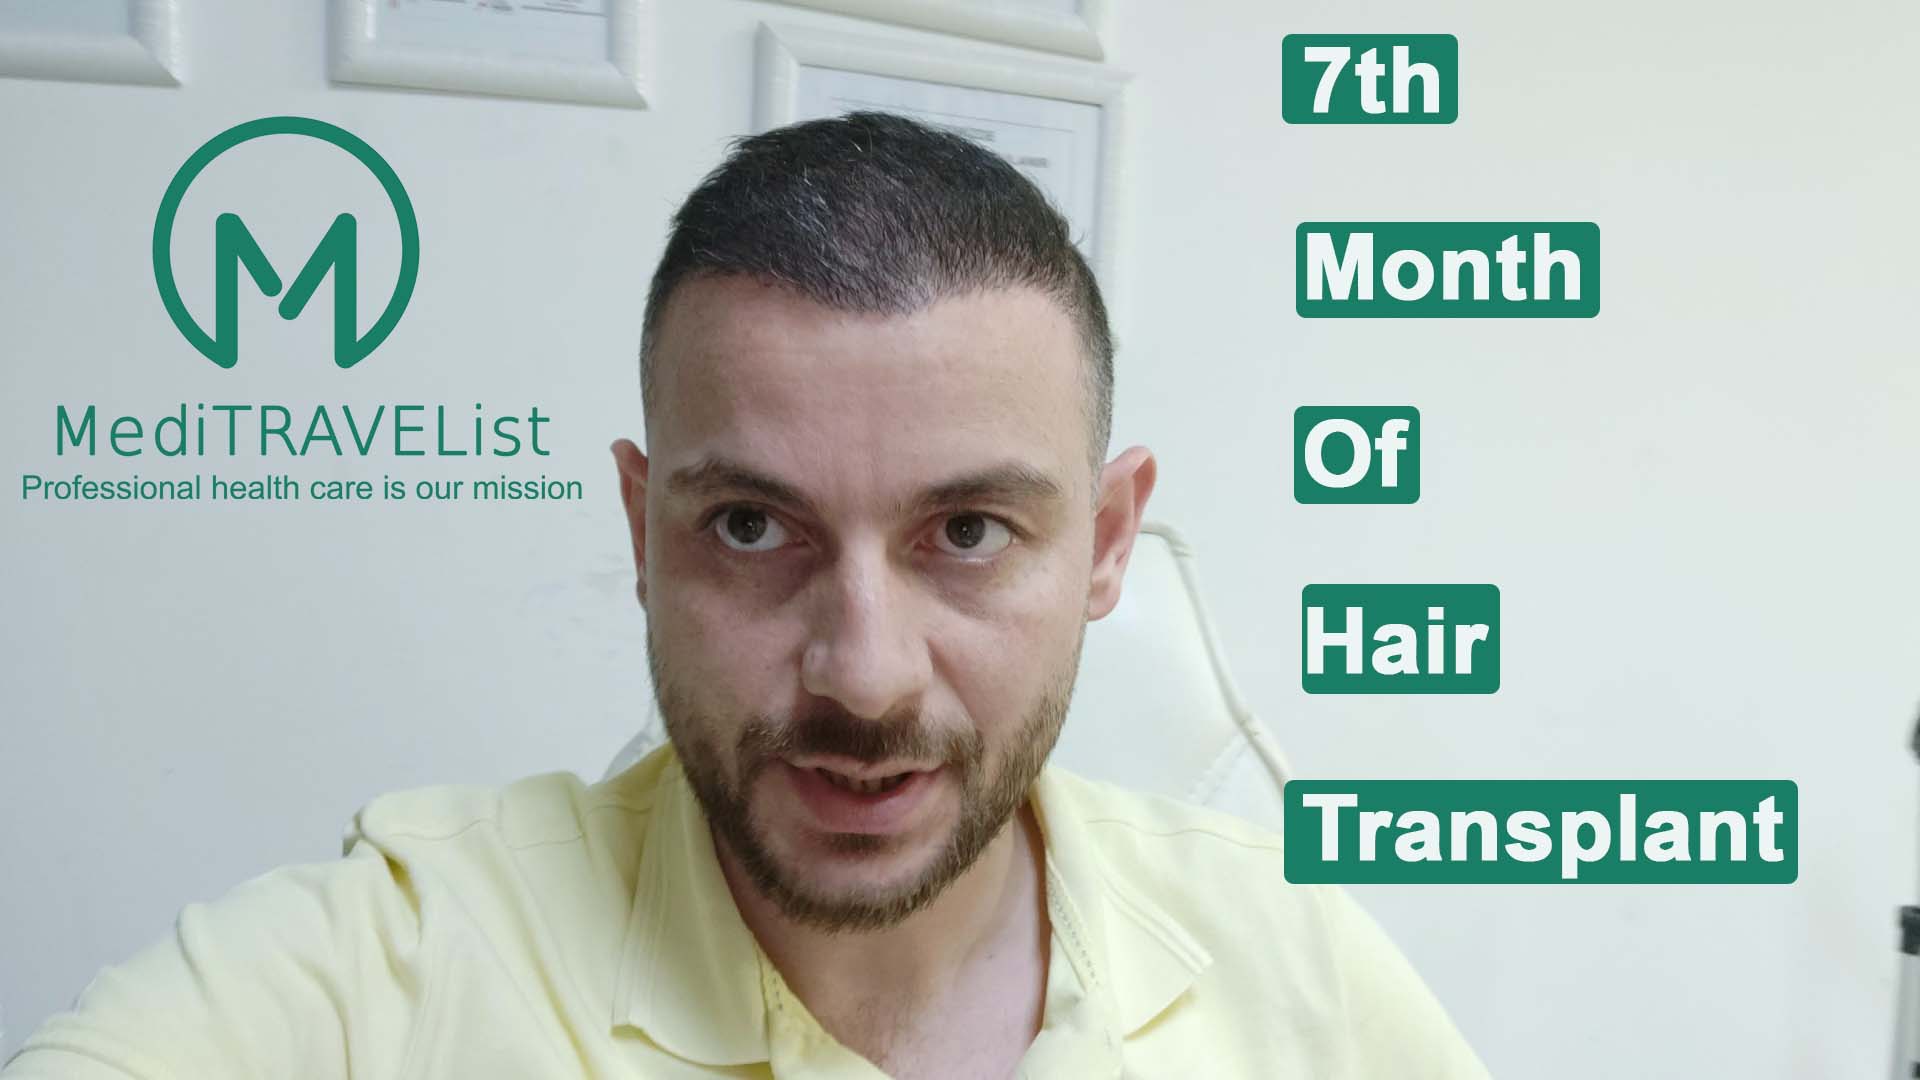 7 th month of Hair transplantation video cover image